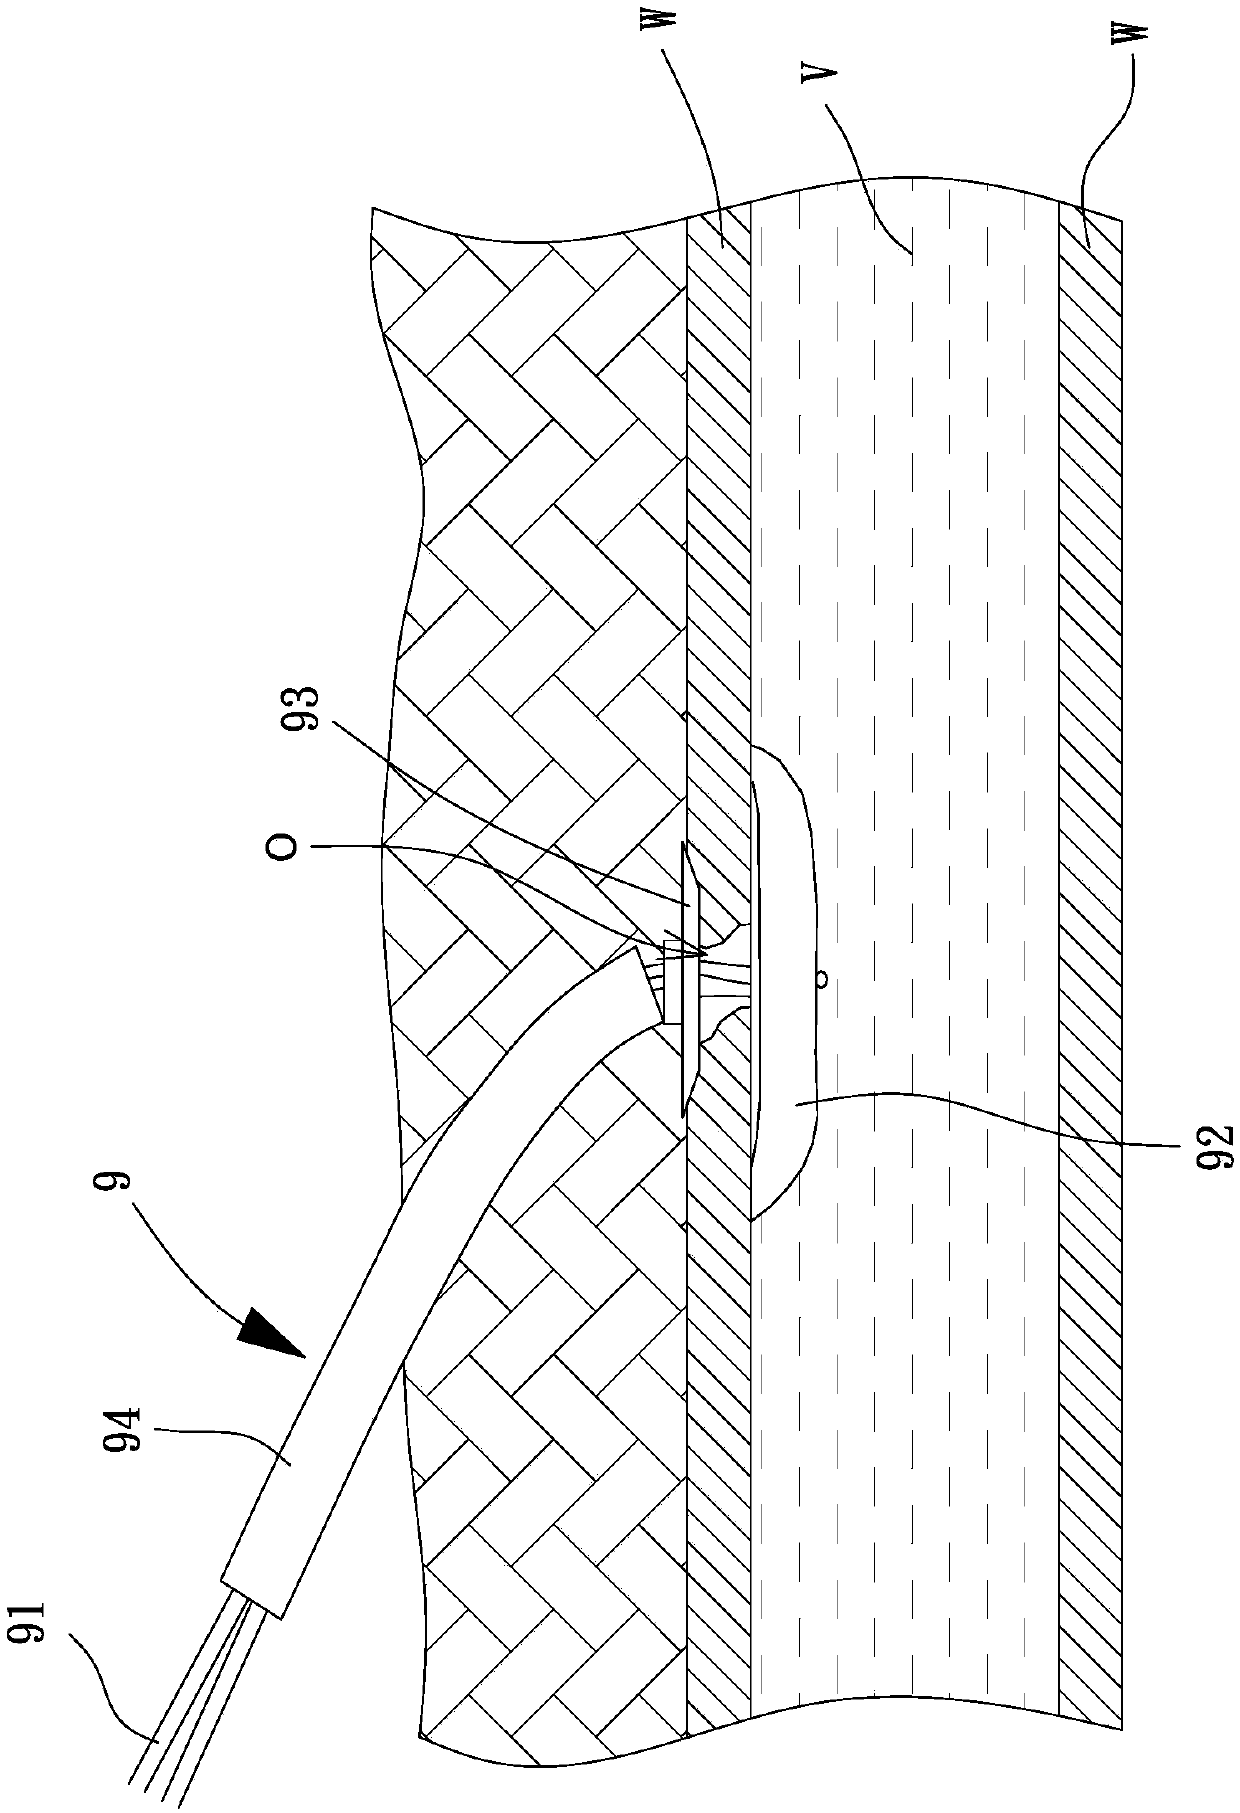 Vascular puncture sealing device